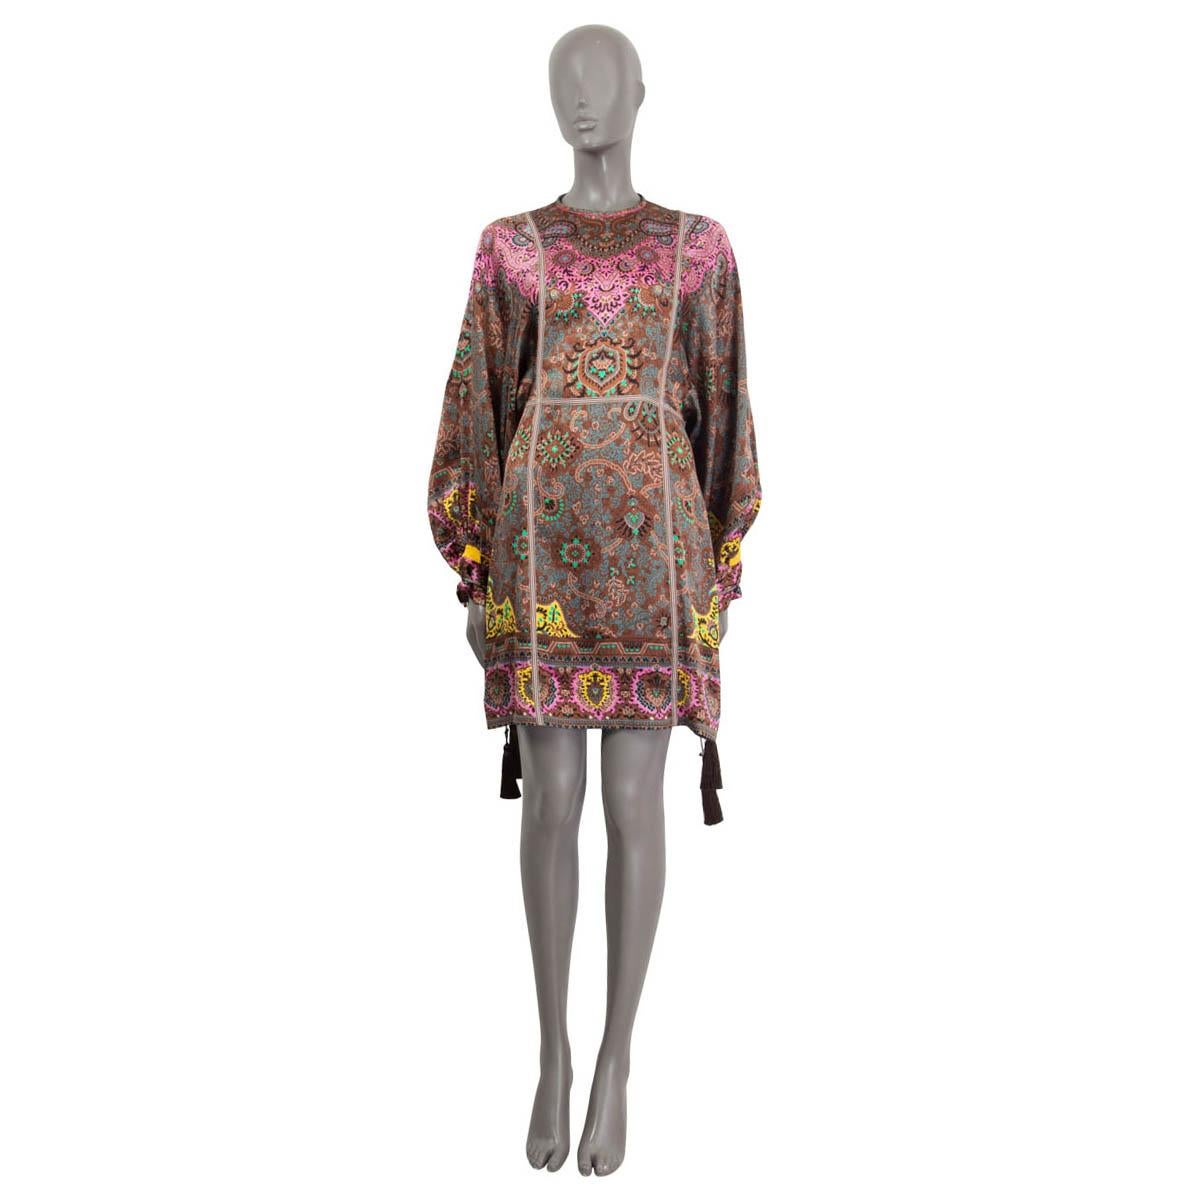 100% authentic Etro batwing long sleeve dress in mulitcolor paisley printed silk (100%). Embellished with two cords on the cuffs. Comes with an open back and opens with a button and a concealed zipper on the open back. Unlined. Has been worn and is